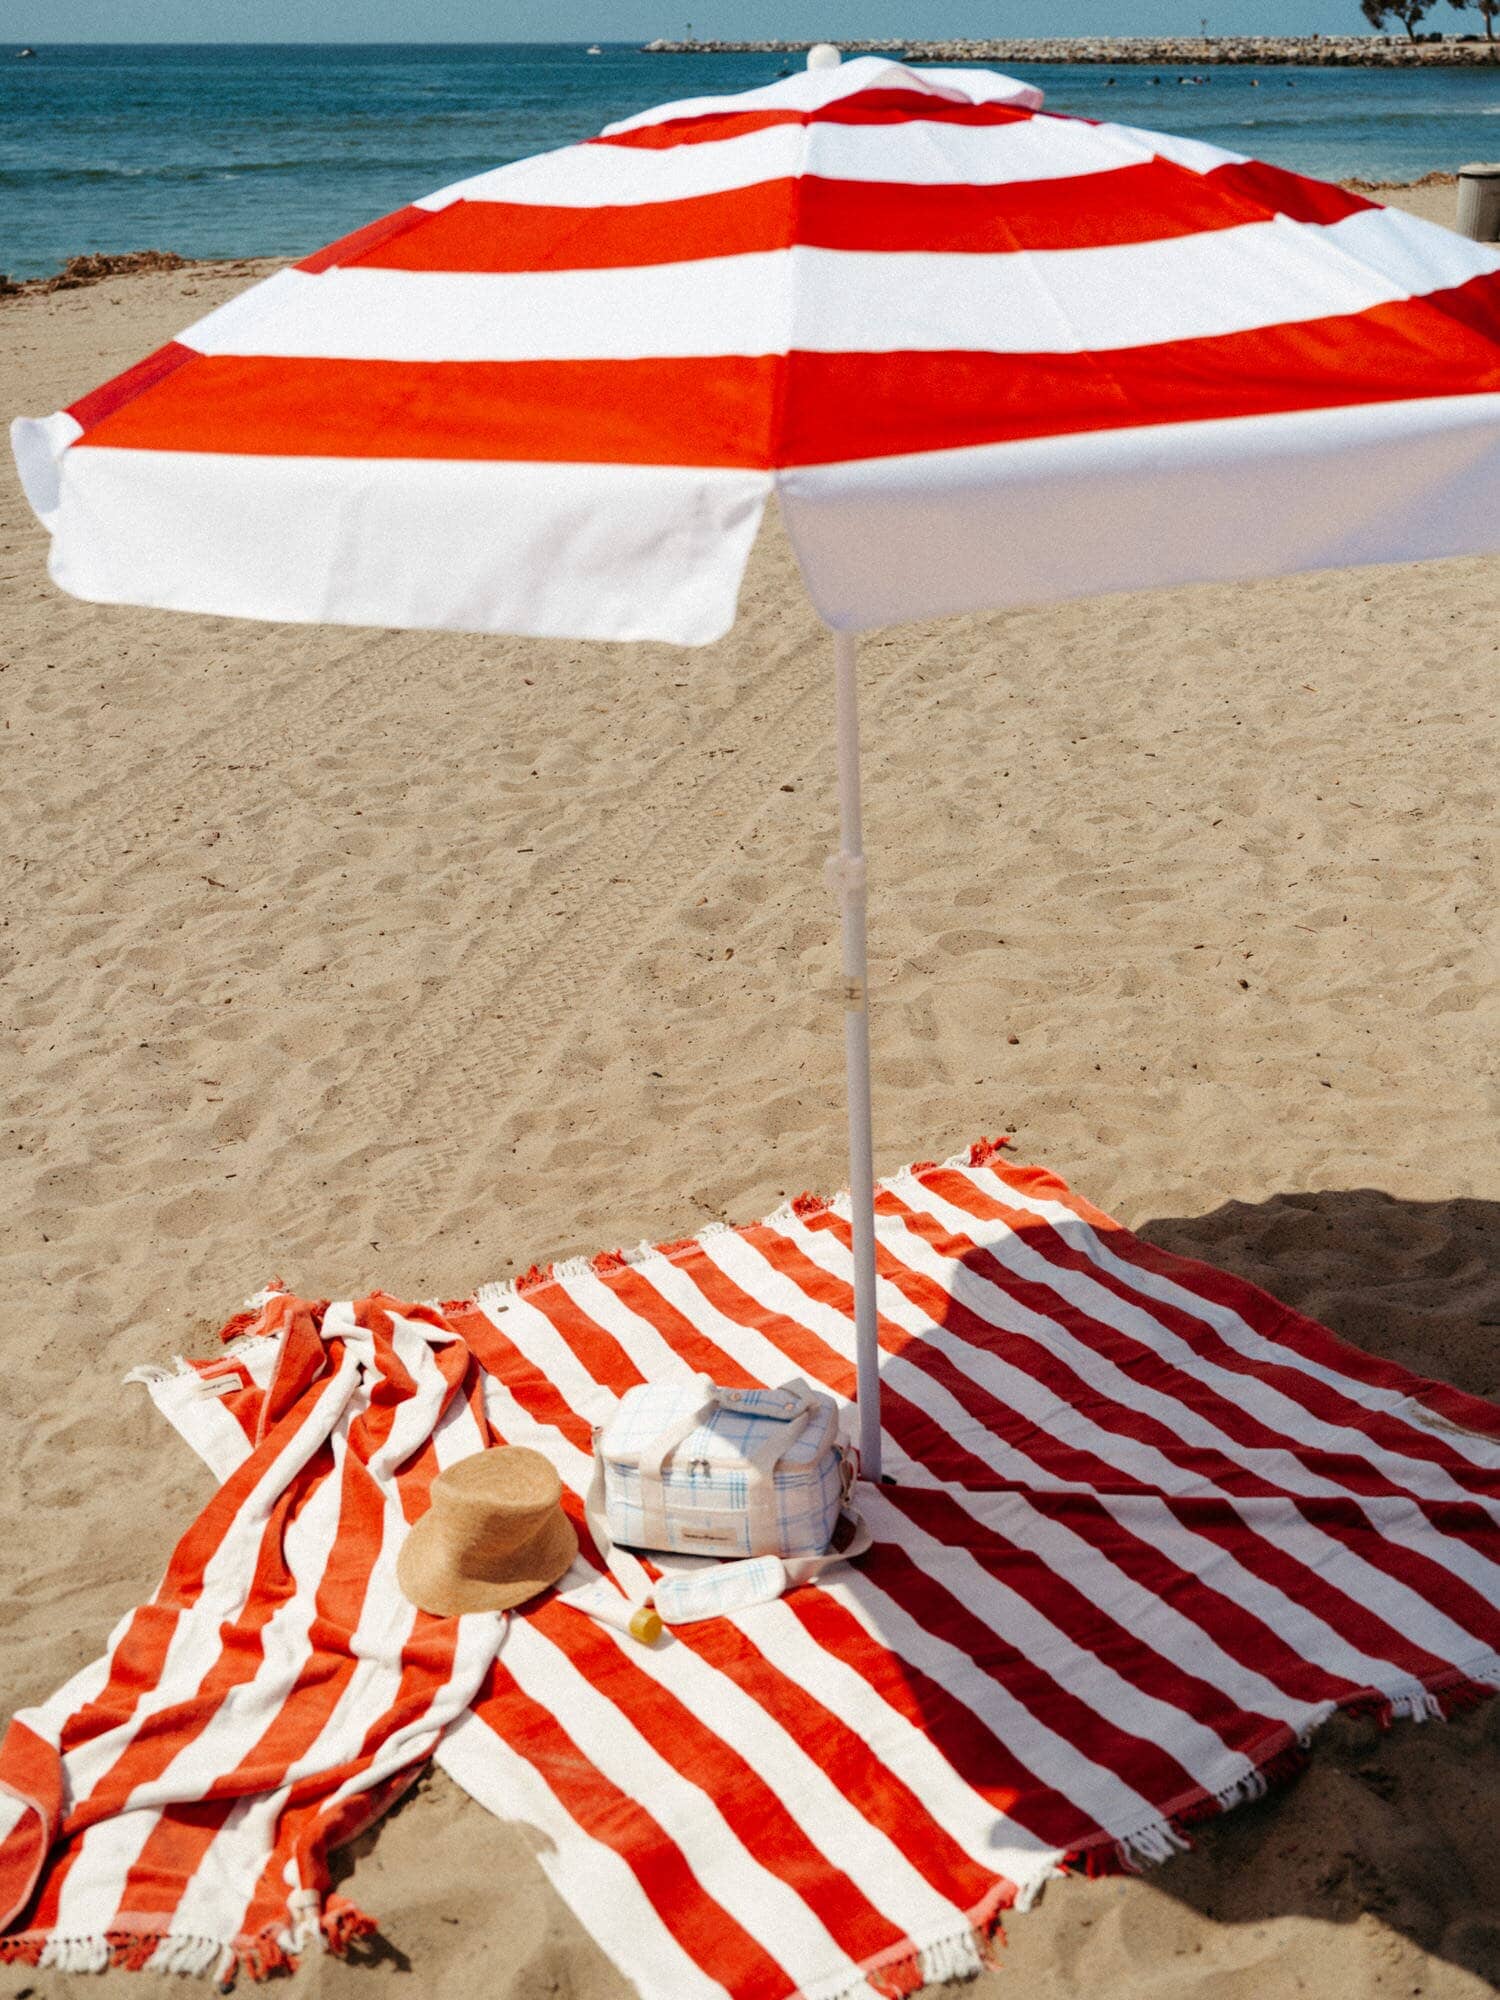 Le sirenuse holiday beach set up with umbrella, blanket, towel and cooler